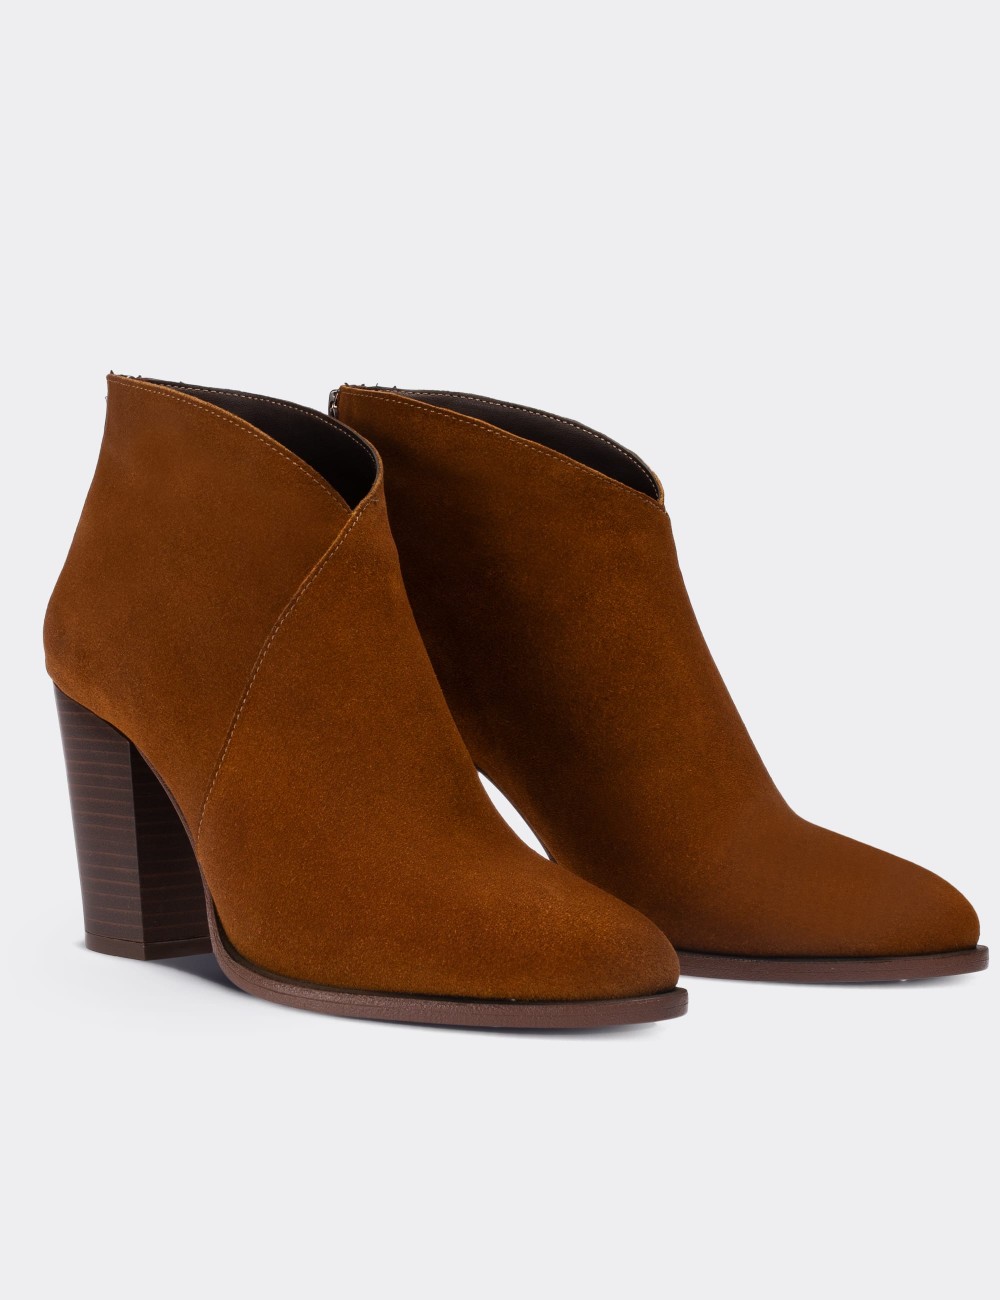 Tan Suede Leather Boots - E4461ZTBAC01